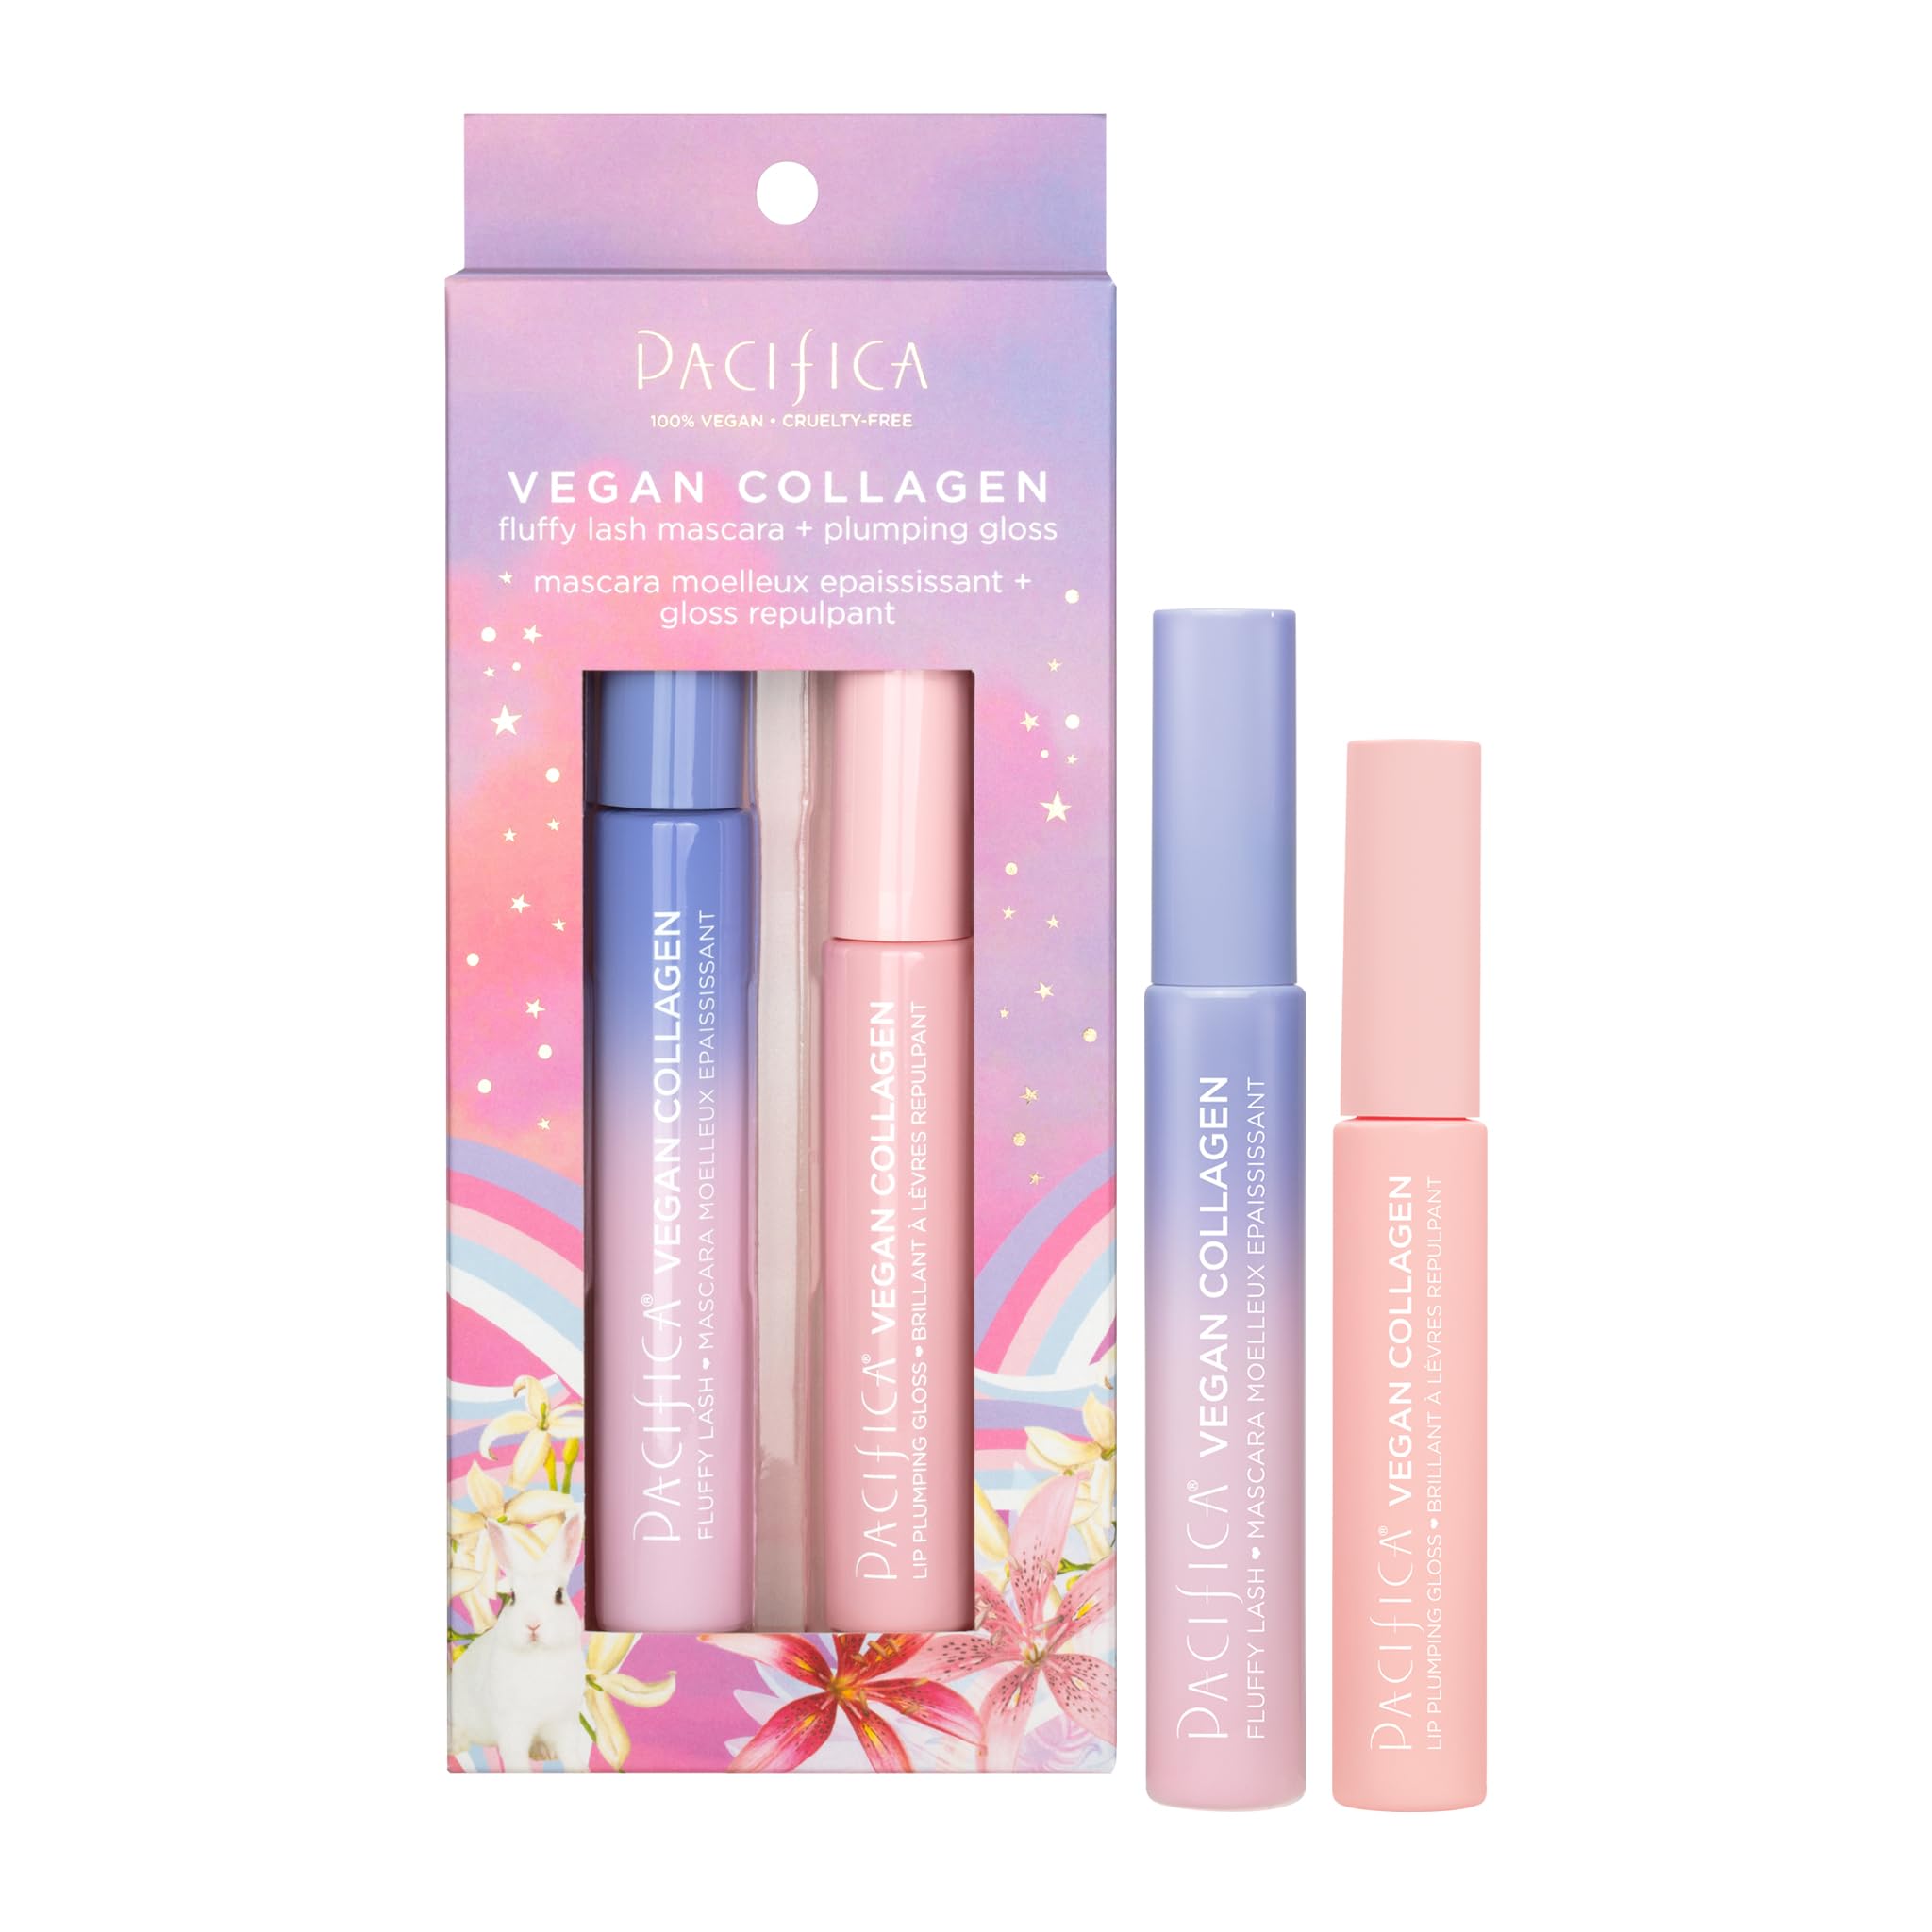 2-Piece Pacifica Beauty Vegan Collagen Lash & Lip Makeup Set (1 Fluffy Lash Mascara, 1 Plumping Gloss) $10.23 w/ S&S + Free Shipping w/ Prime or on $35+